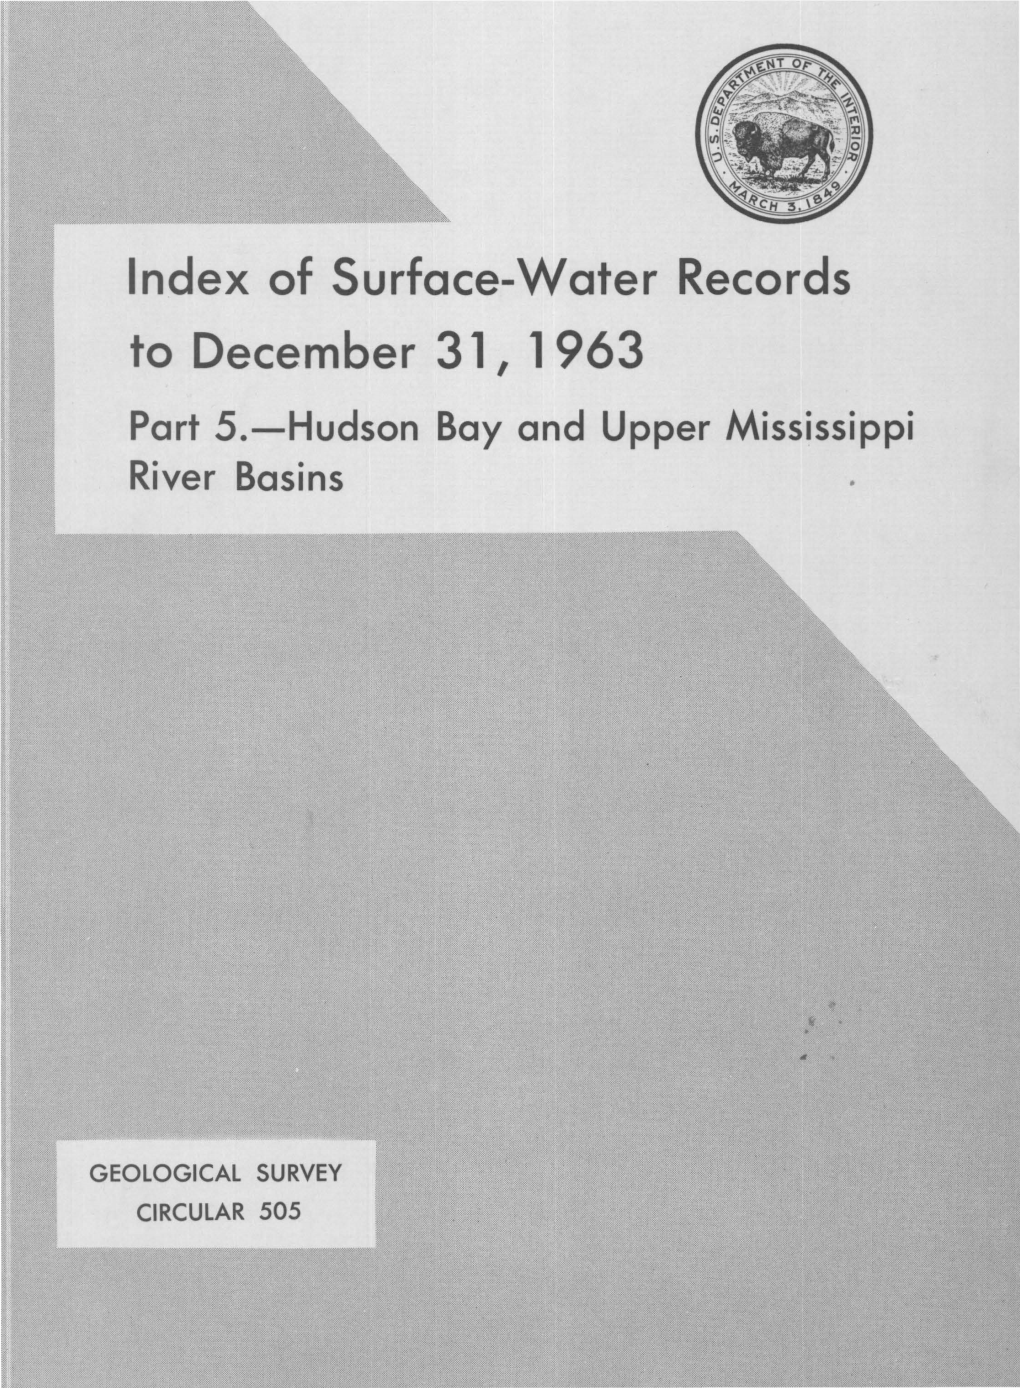 Index of Surface-Water Records to December 31, 1 963 Part 5.-Hudson Bay and Upper Mississippi River Basins